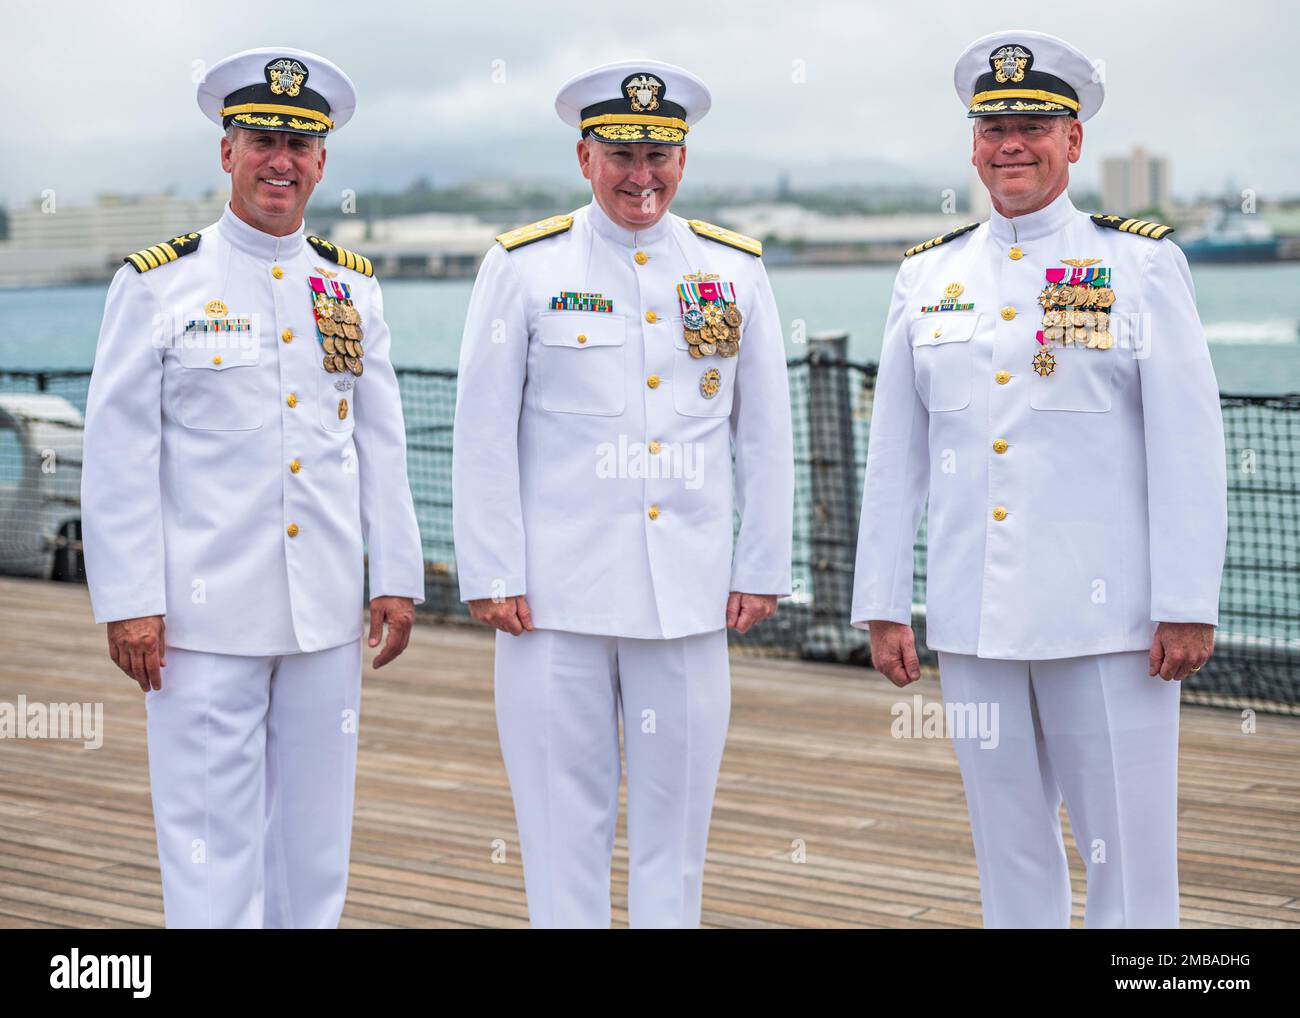 220614-N-KN989-1012 JOINT BASE PEARL HARBOR-HICKAM, Hawaii (June 14, 2022) Rear Adm. Timothy Kott, Commander, Navy Region Hawaii (center), Capt. Mark Sohaney, Commander, Joint Base Pearl Harbor-Hickam (left) and Capt. Erik Spitzer (right) pose for a picture following a change of command ceremony aboard USS Missouri (BB-63). Sohaney relieved Capt. Erik Spitzer during the official change of command ceremony June 14, 2022. Joint Base Pearl Harbor-Hickam delivers the best service in base operating support to supported and tenant commands to enable operational mission success while simultaneously p Stock Photo